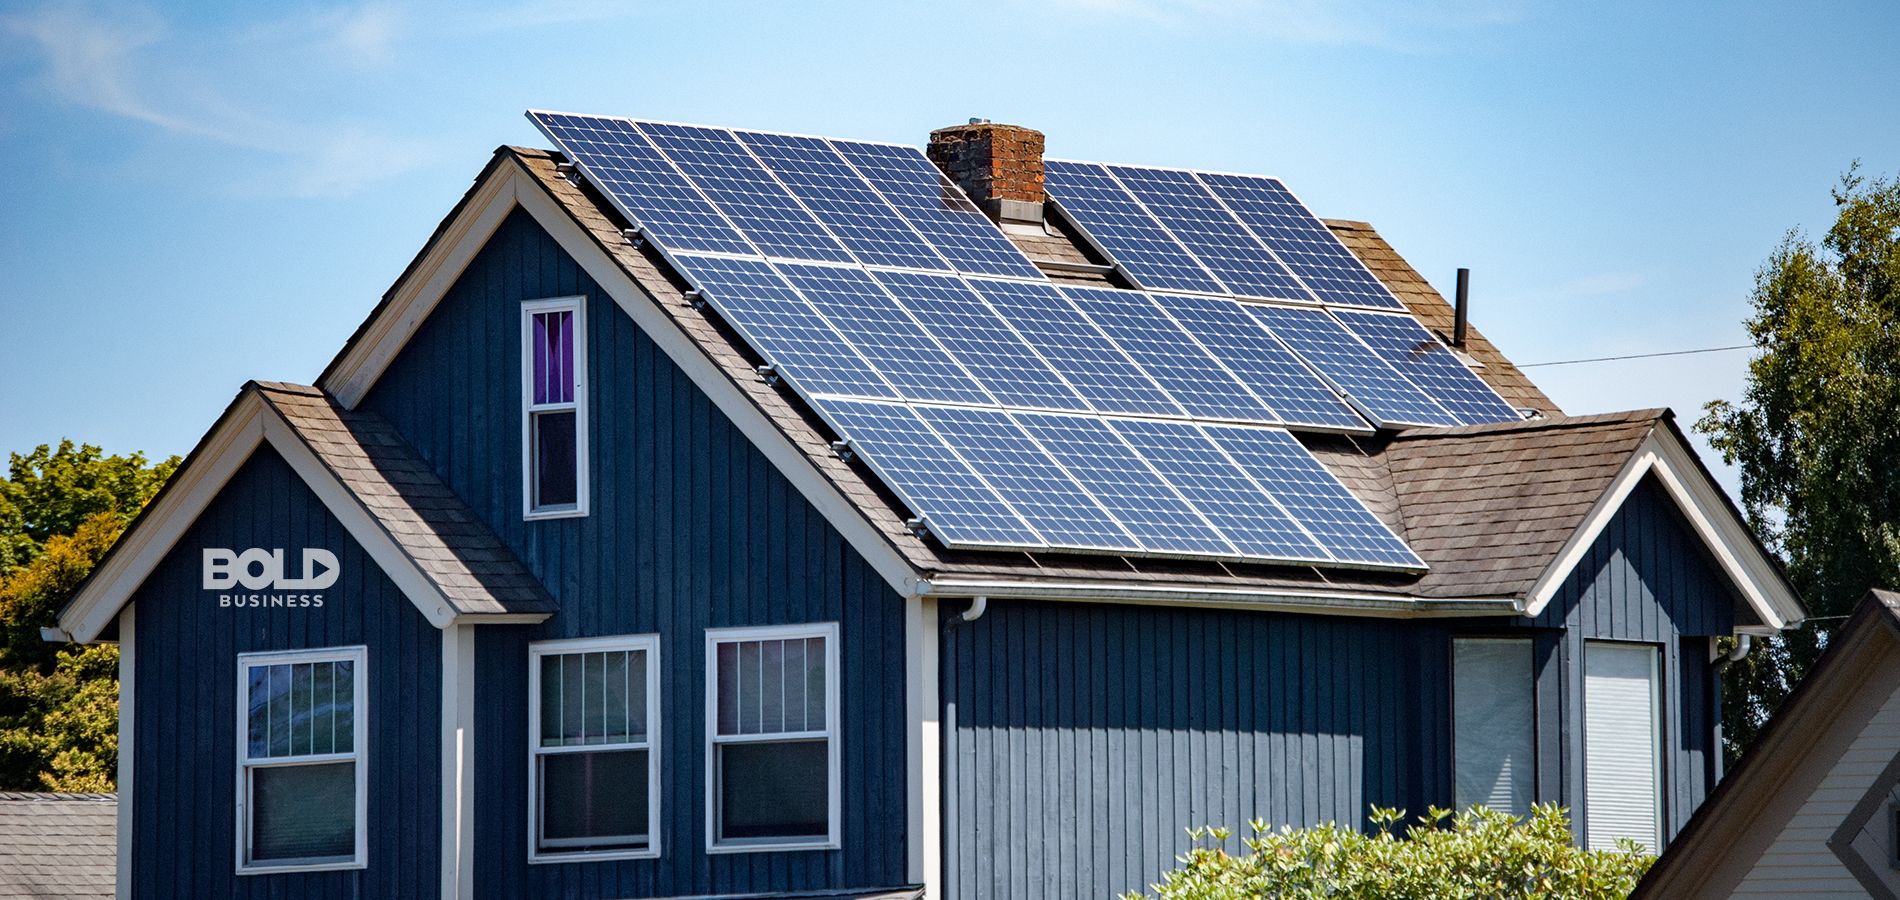 a photo containing a digital rendering of Tesla rooftop solar shingles on a house